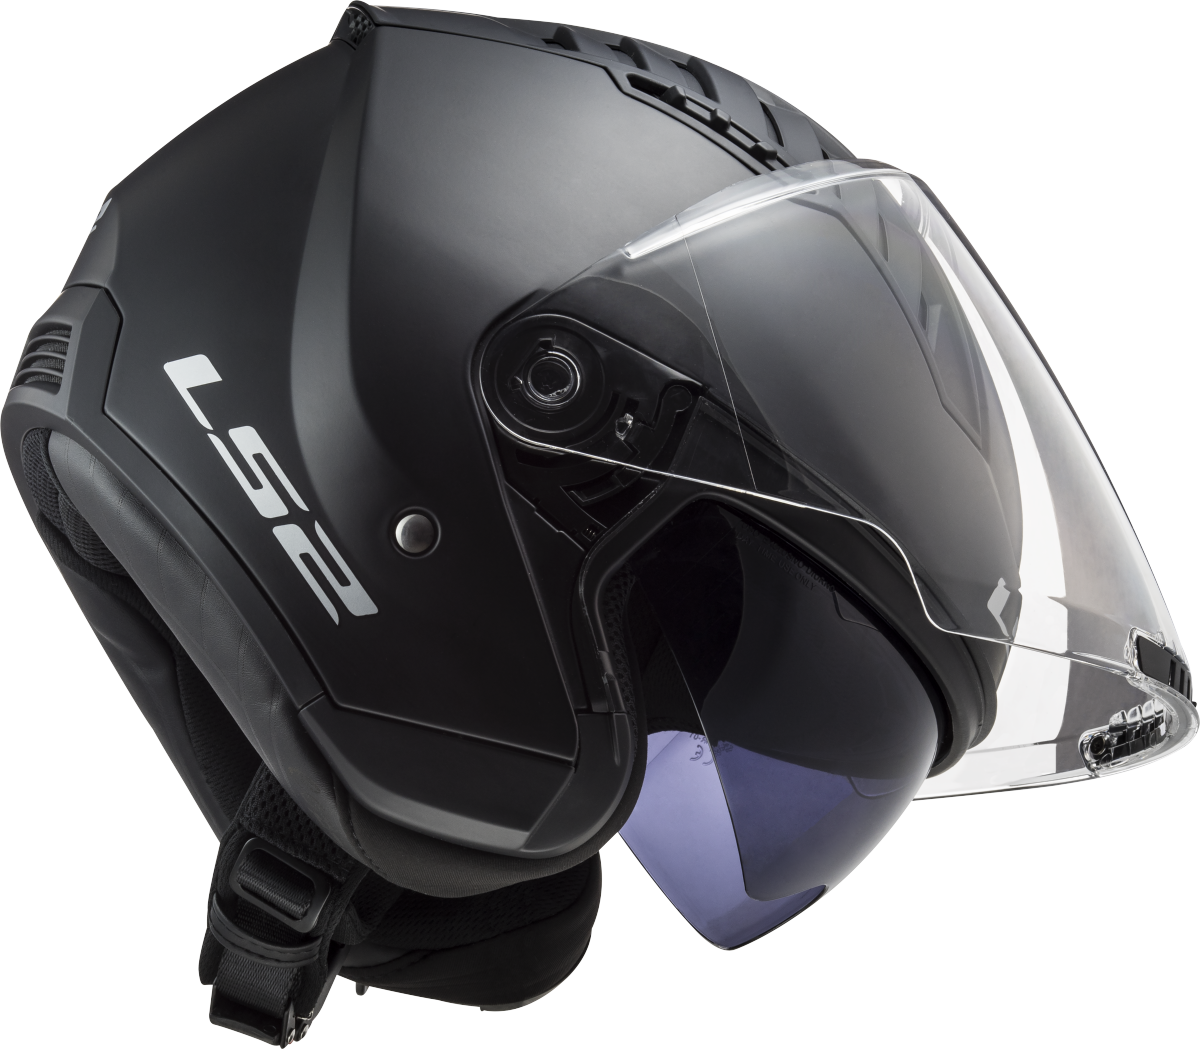 Casco LS2 OF600 COPTER SOLID NEGRO MATE 11